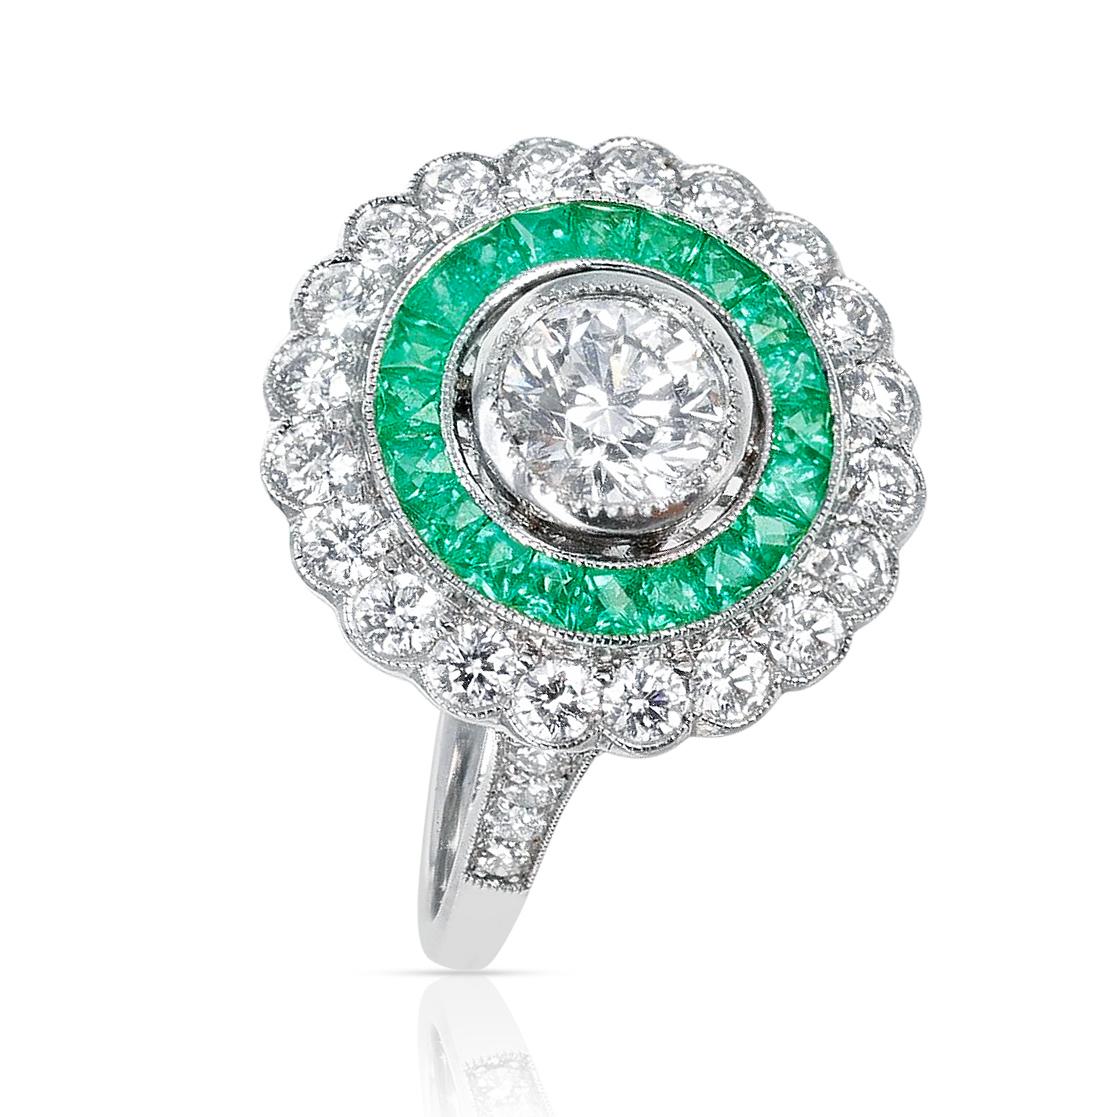 A beautiful French Art Deco Style Diamond and Emerald Ring made Platinum. The Center Diamond weighs 0.80 cts. and the other diamonds weigh 1.50 carats. Ring Size US 6.50.